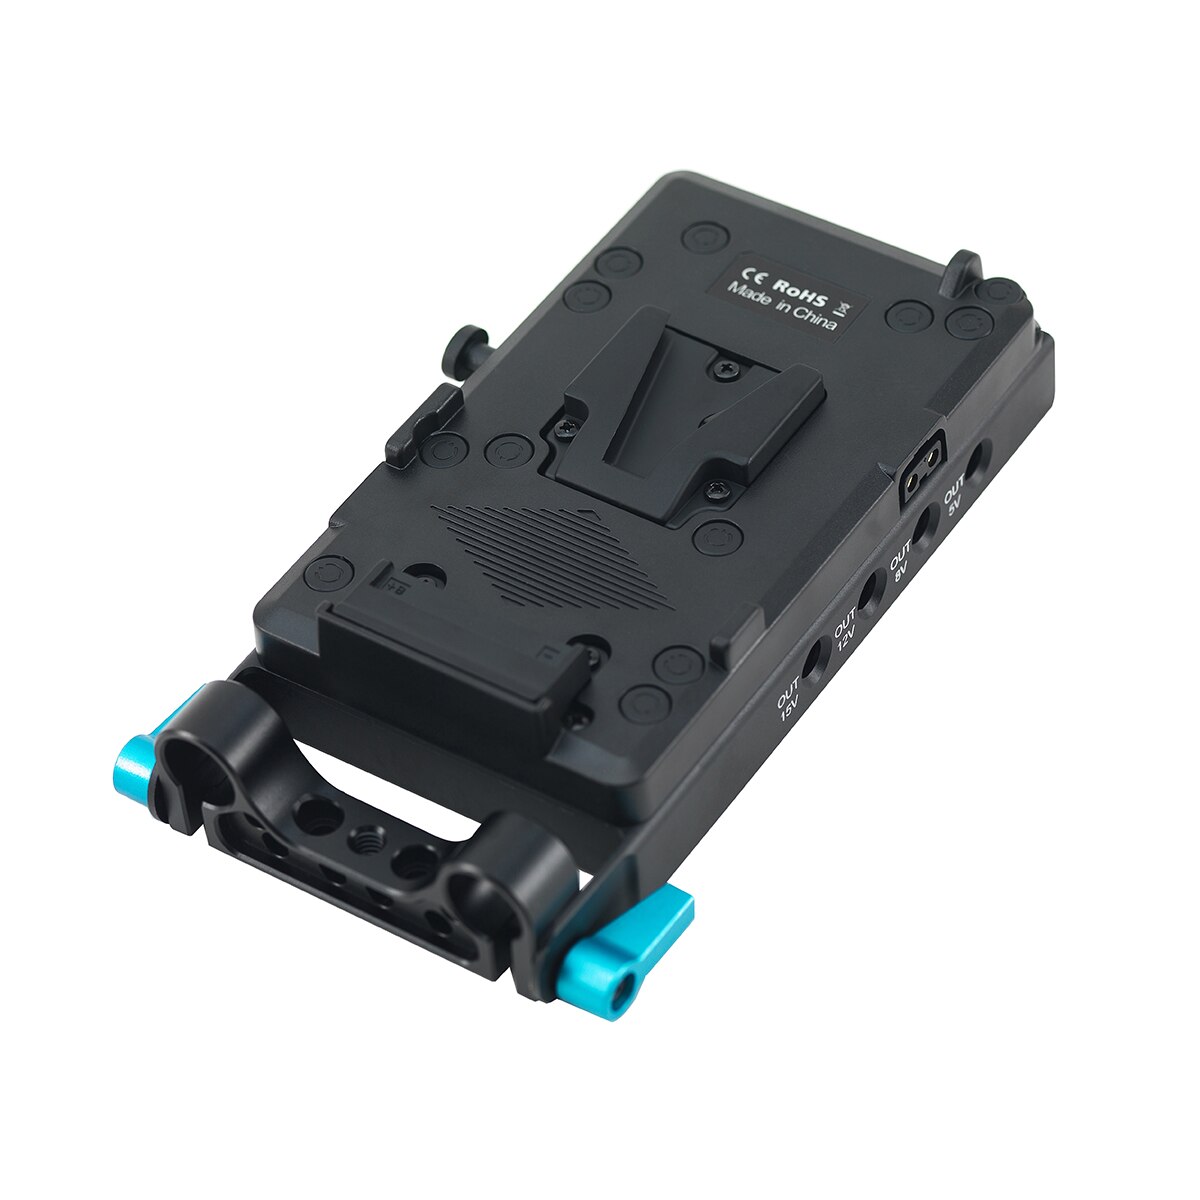 WY-VG3 Power Supply System V Mount Battery Plate Adapter for Sony A9 A9R A9S A7R3 A7M3 A7S3 A7III A7R4 A7M4 A6600 A7C FX3